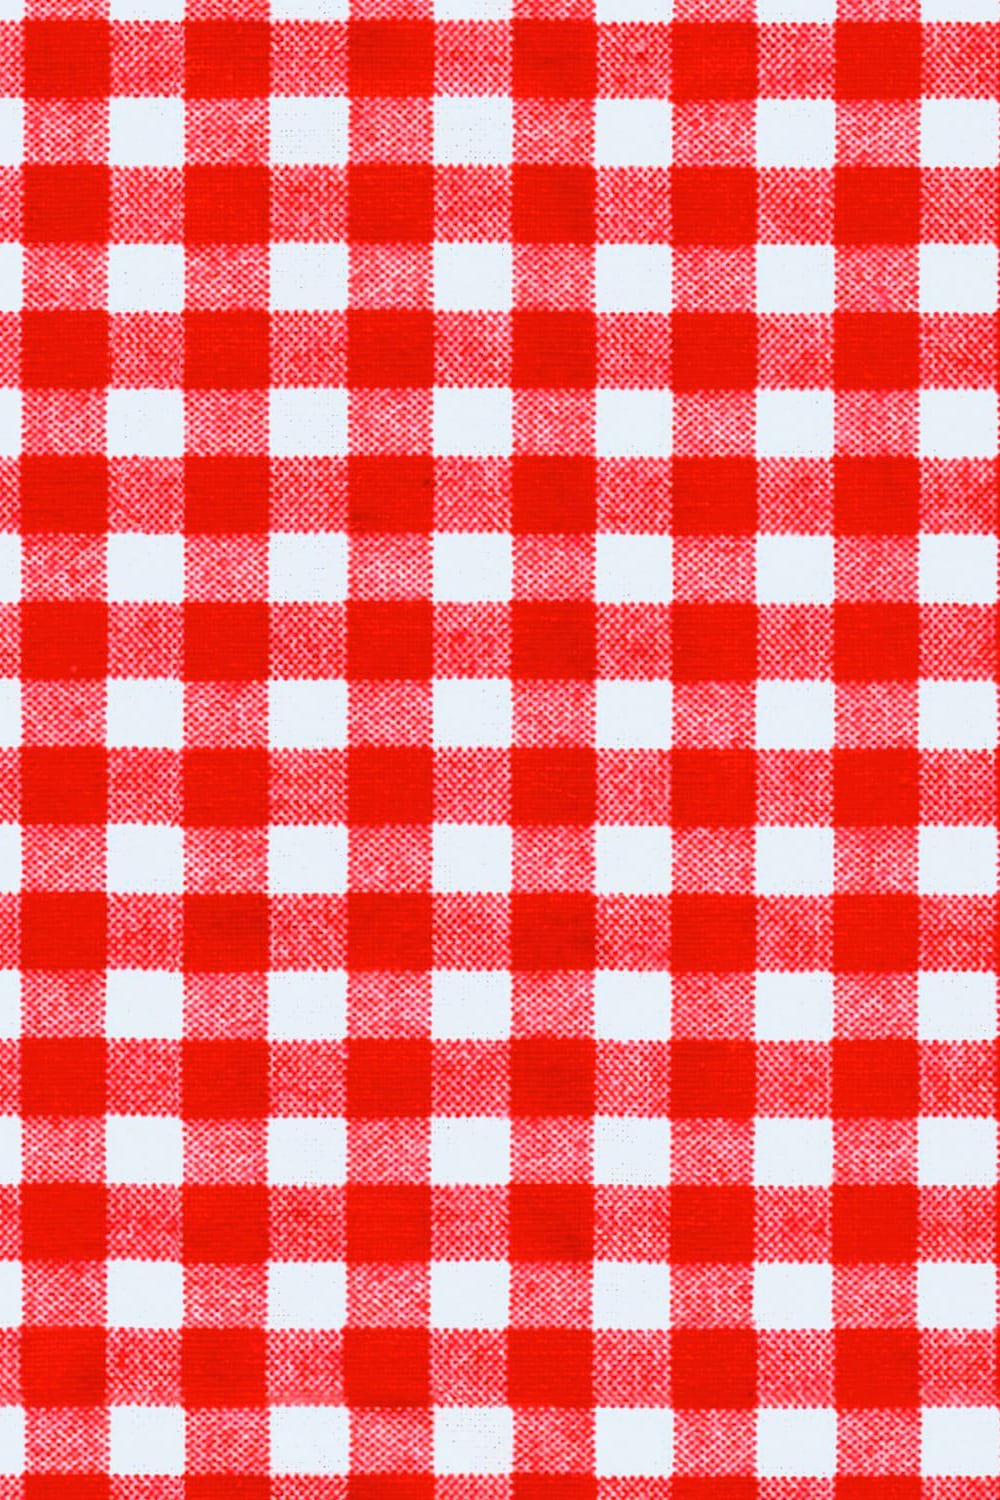 Checkered red and white fabric - close up